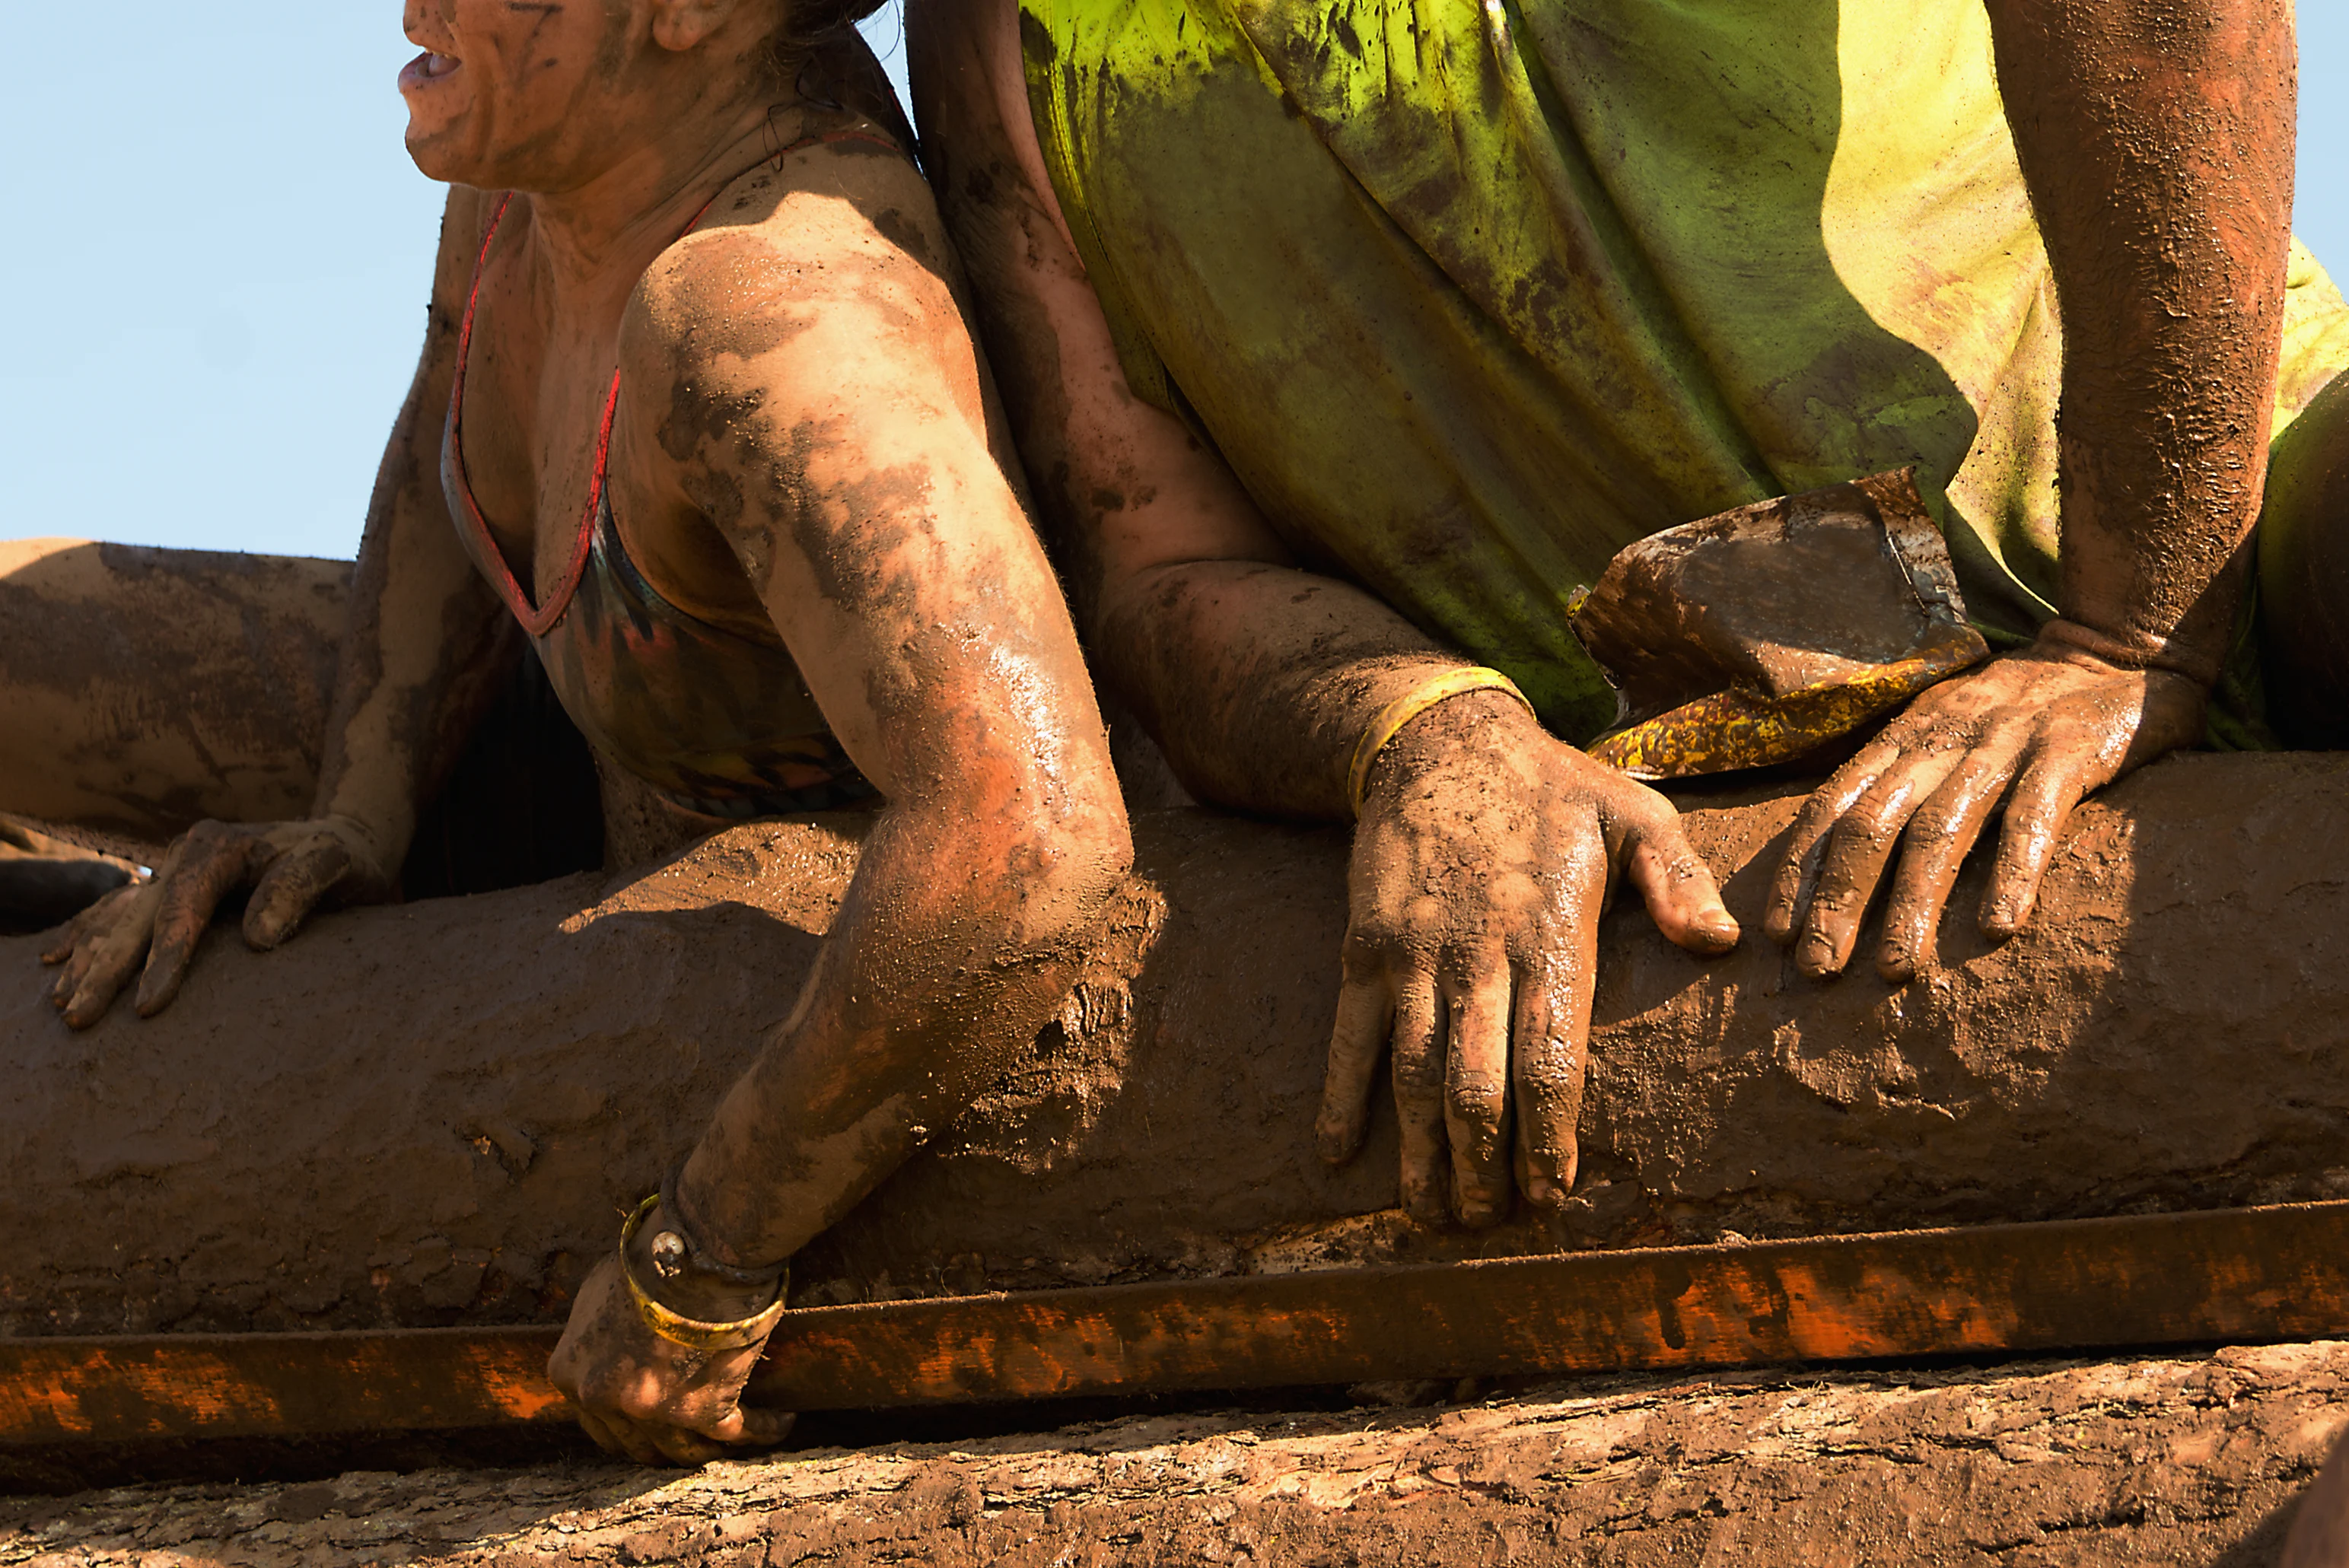 Mud runs are Dirty, challenging, and next-level fun.